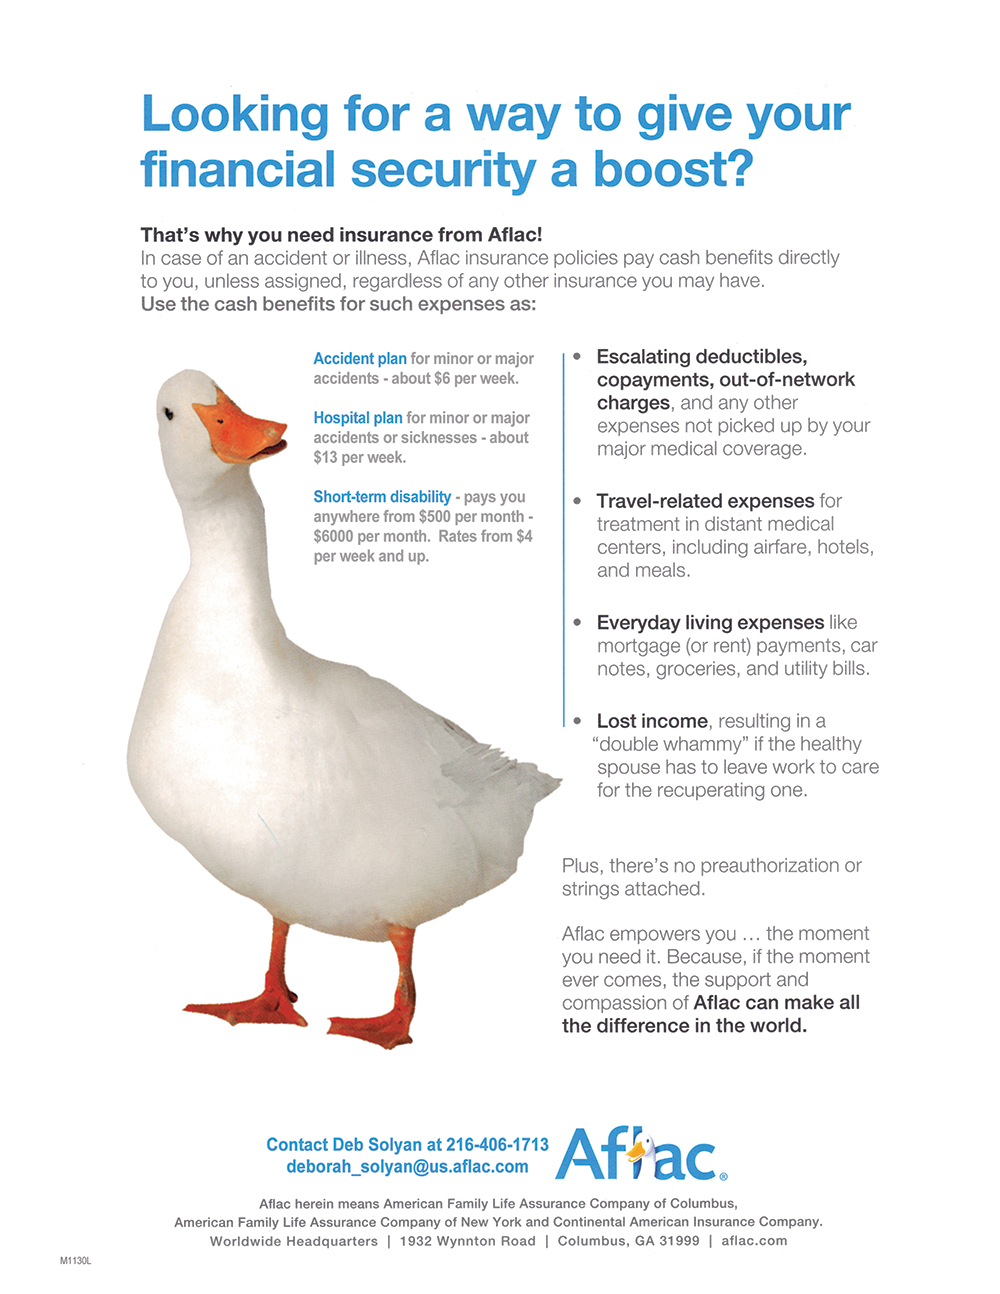 aflac-financial-security-flyer-new-flat-may-2015-used-oct2017.jpg